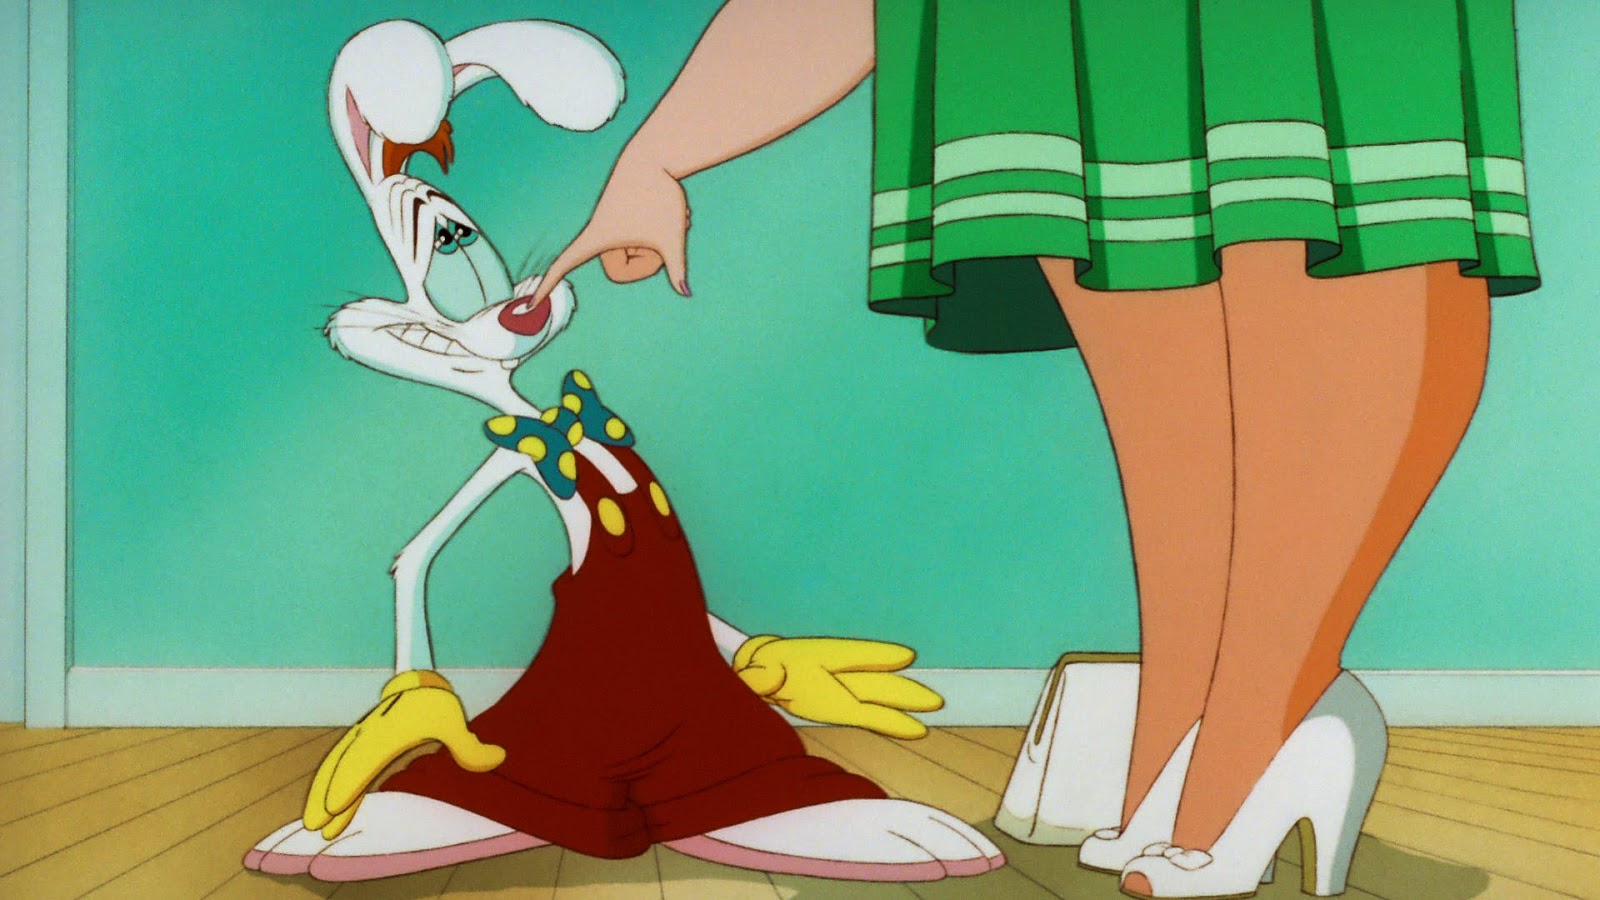 Here are some high-definition screen captures from the Roger Rabbit animate...